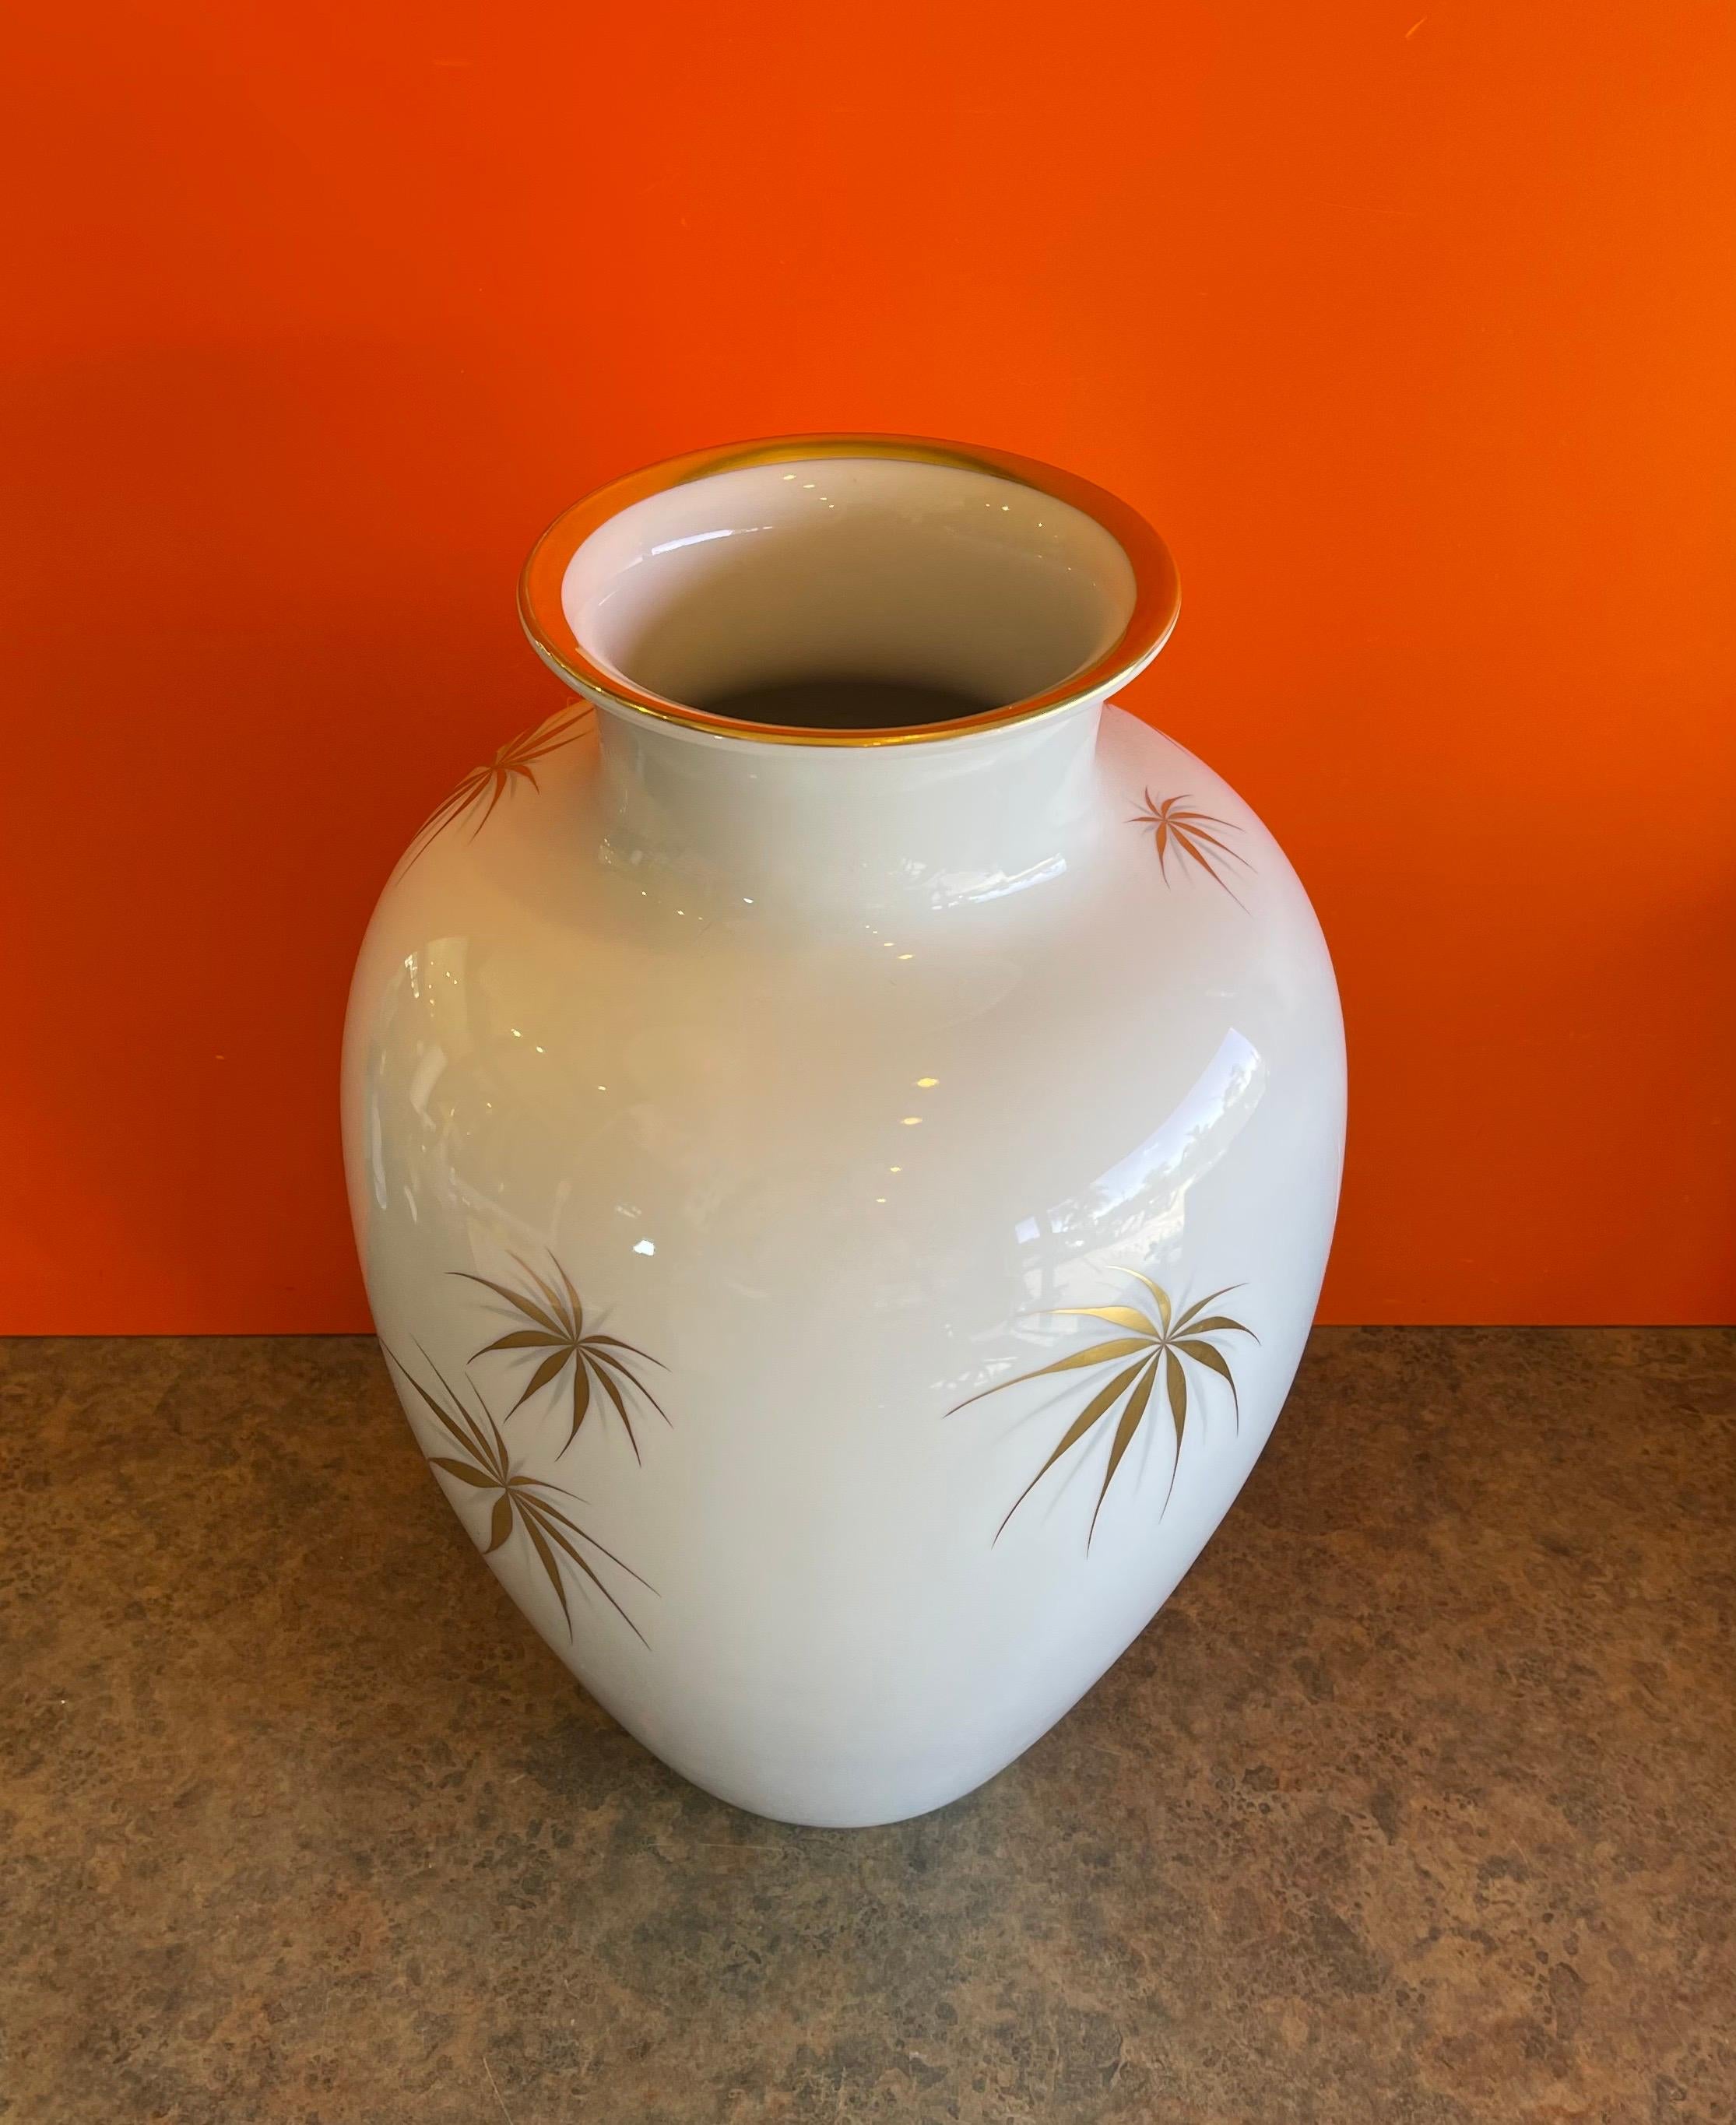 Large Porcelain Vase / Vessel by Heinrich of Bavaria / Selb In Good Condition For Sale In San Diego, CA